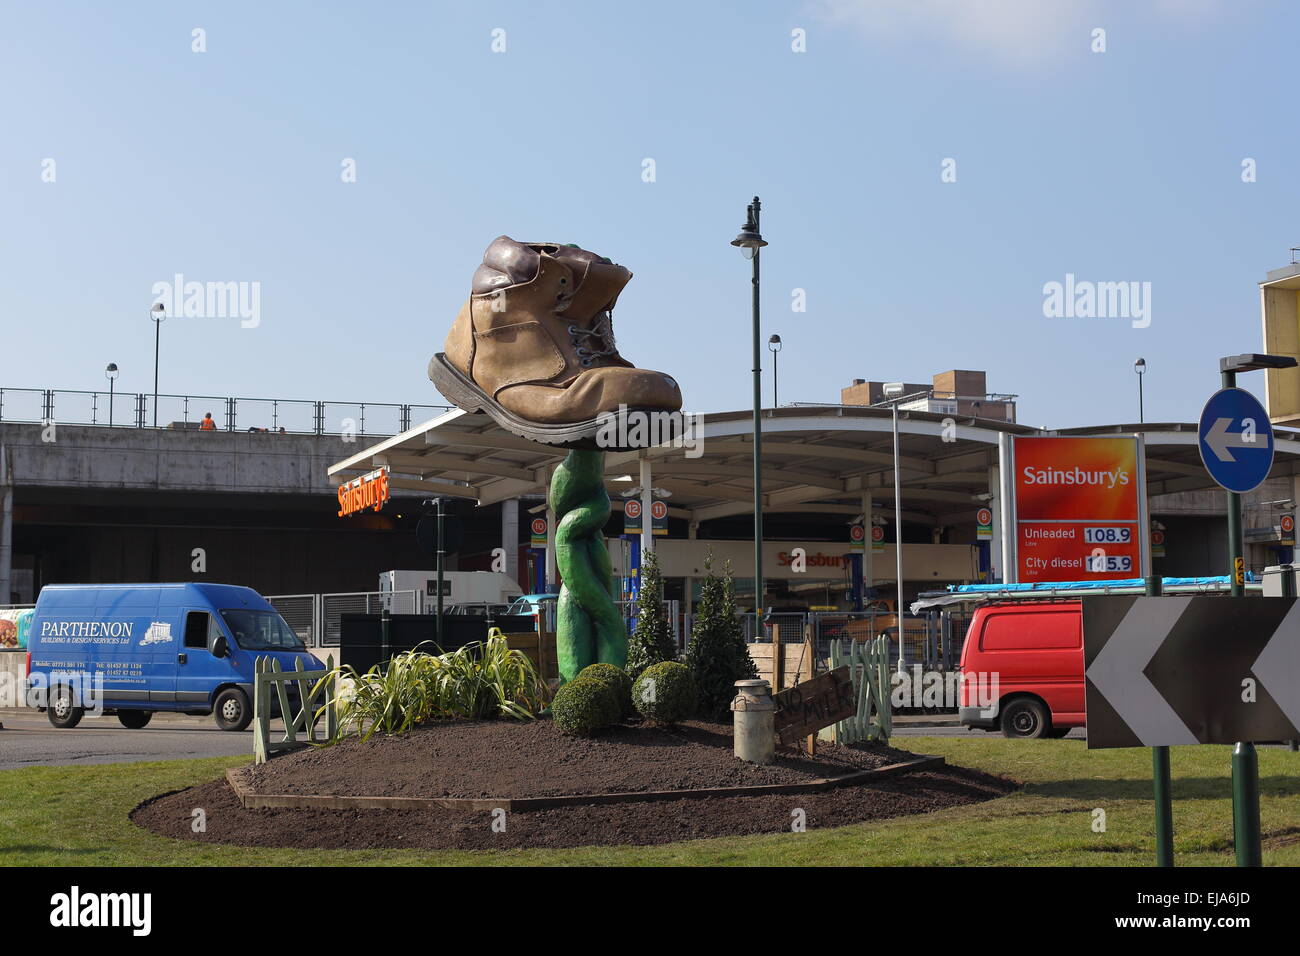 A sculpture showing a boot and a beanstalk located on a roundabout near the Sainsburys Union Street store Stock Photo